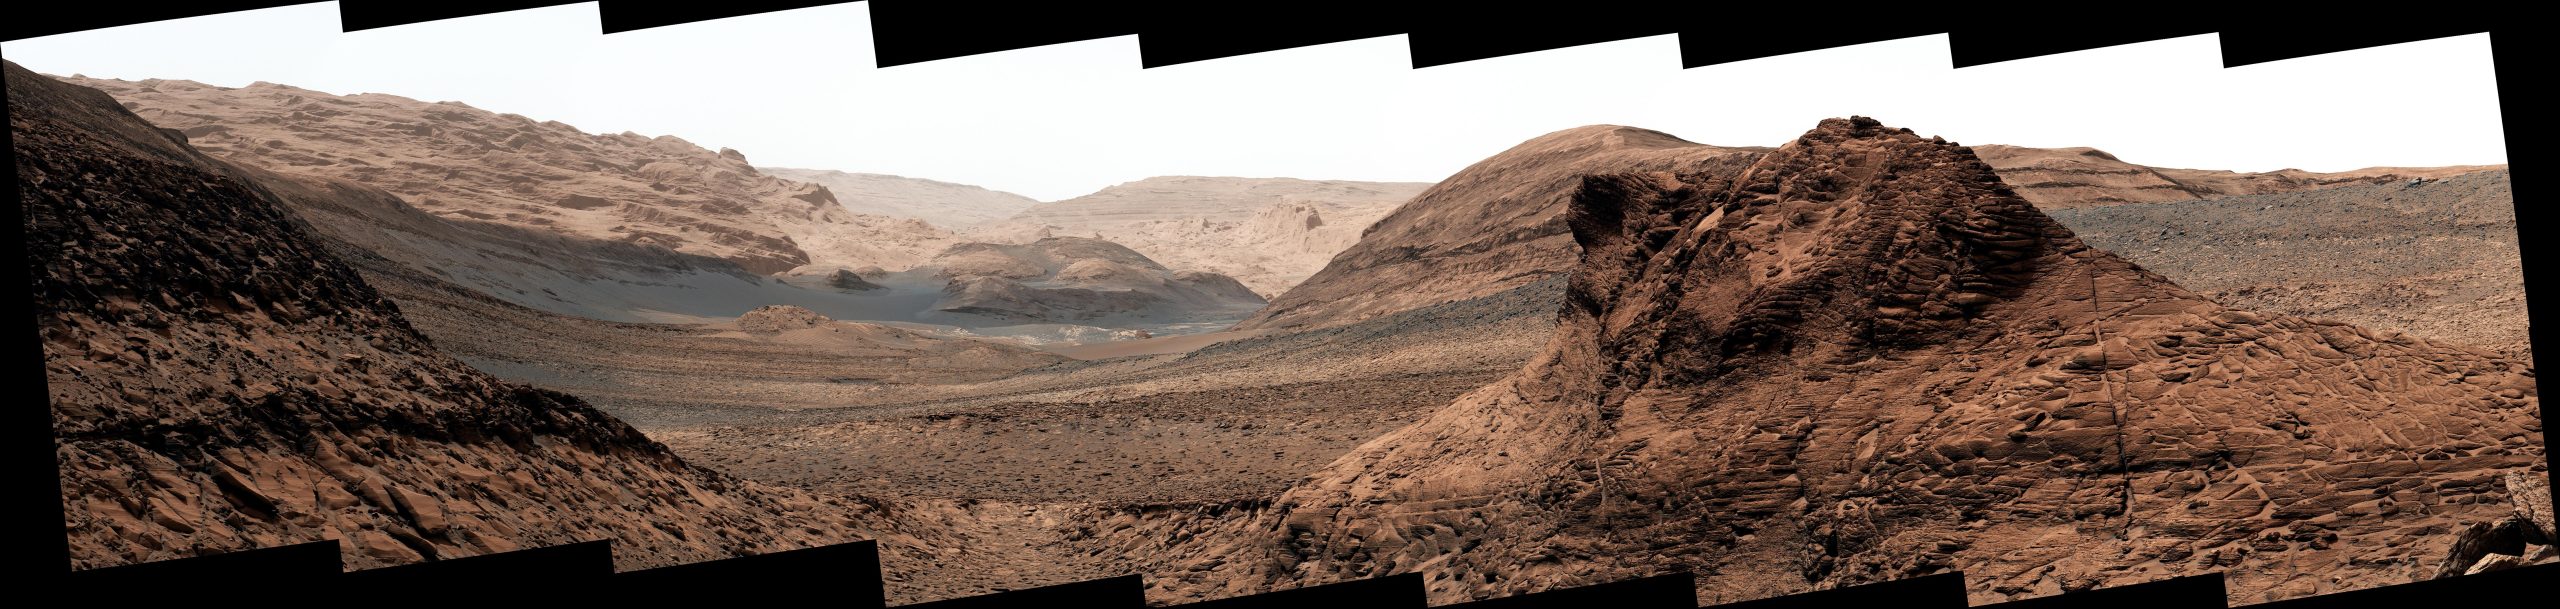 NASA’s Curiosity Rover Discovers Surprise Clues to Ancient Water on Mars – SciTechDaily